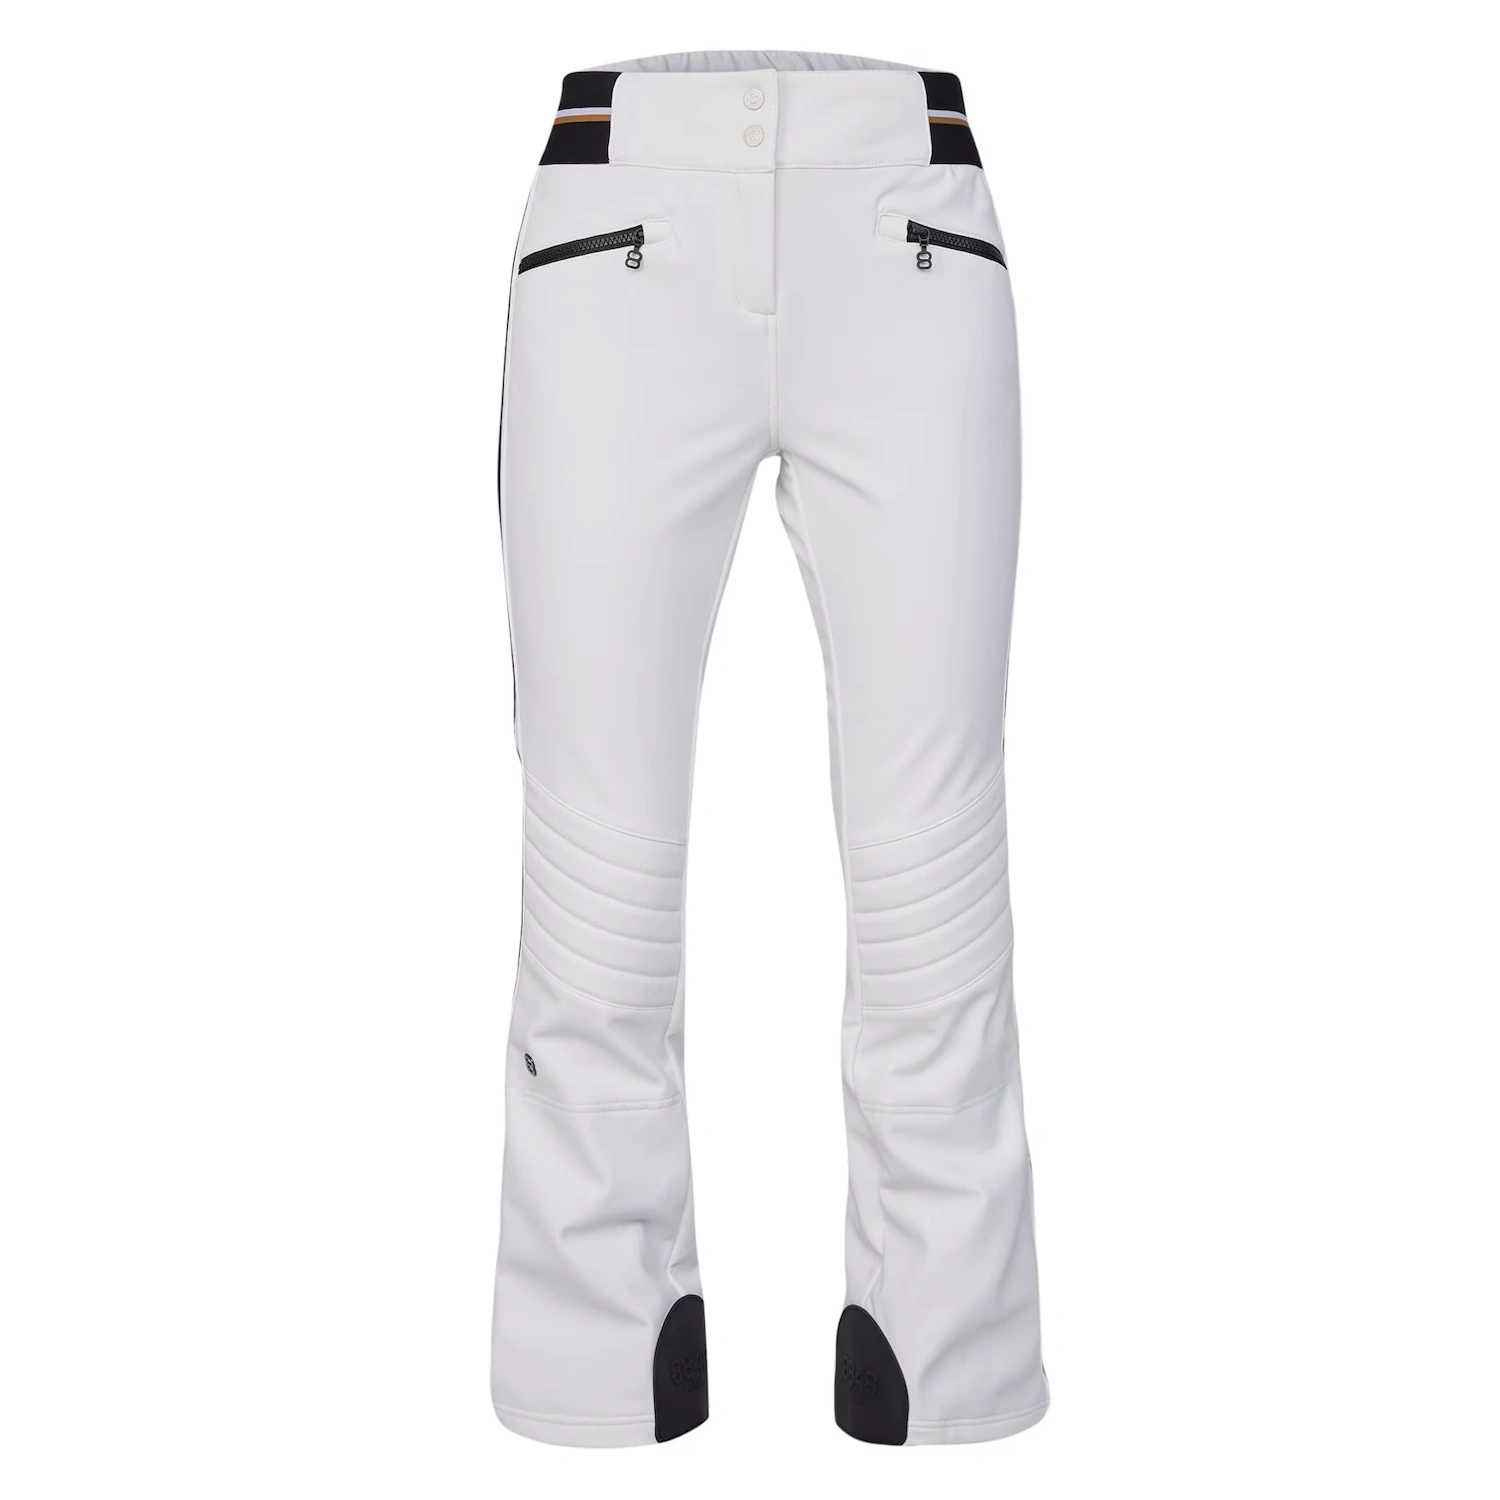 8848 Altitude Vice Pant, World Wide Shipping